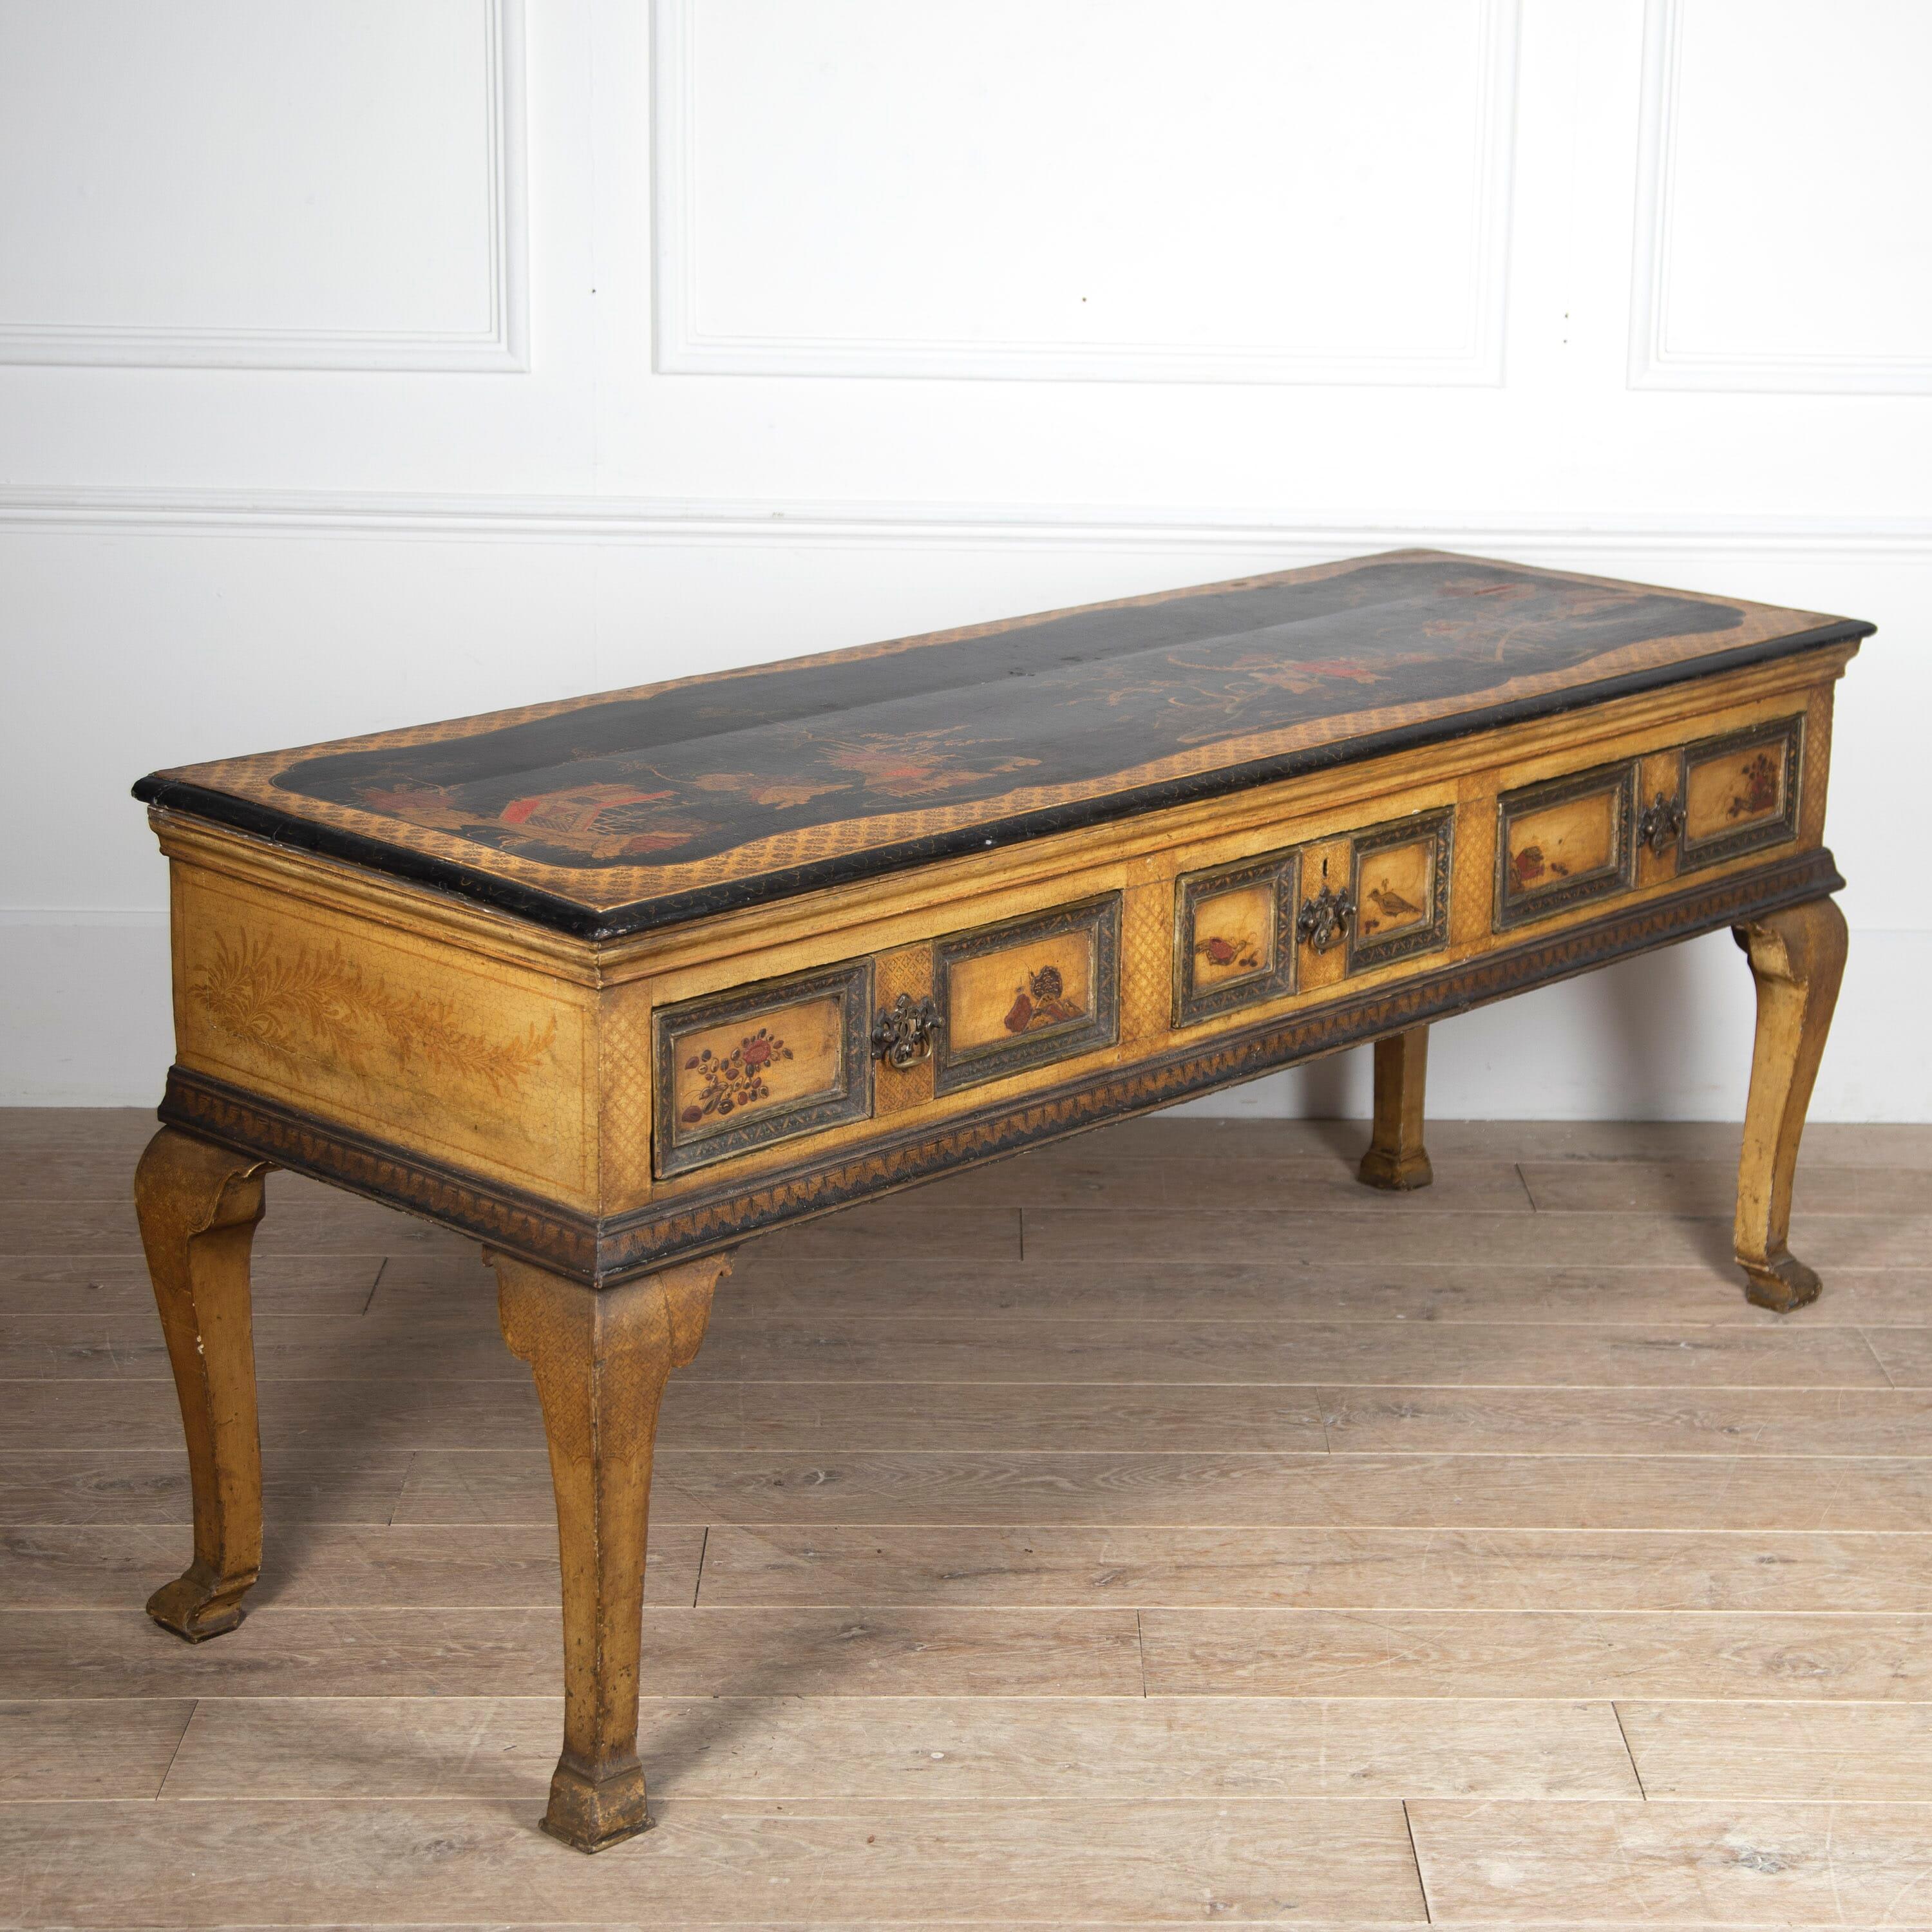 Superb 18th century pine serving table. 

This pine table features a superb 19th century Chinoiserie decoration throughout. To the top of this table, there is a variety of cartouche decorations with gilded, black chinoiseries scenes also. 

The